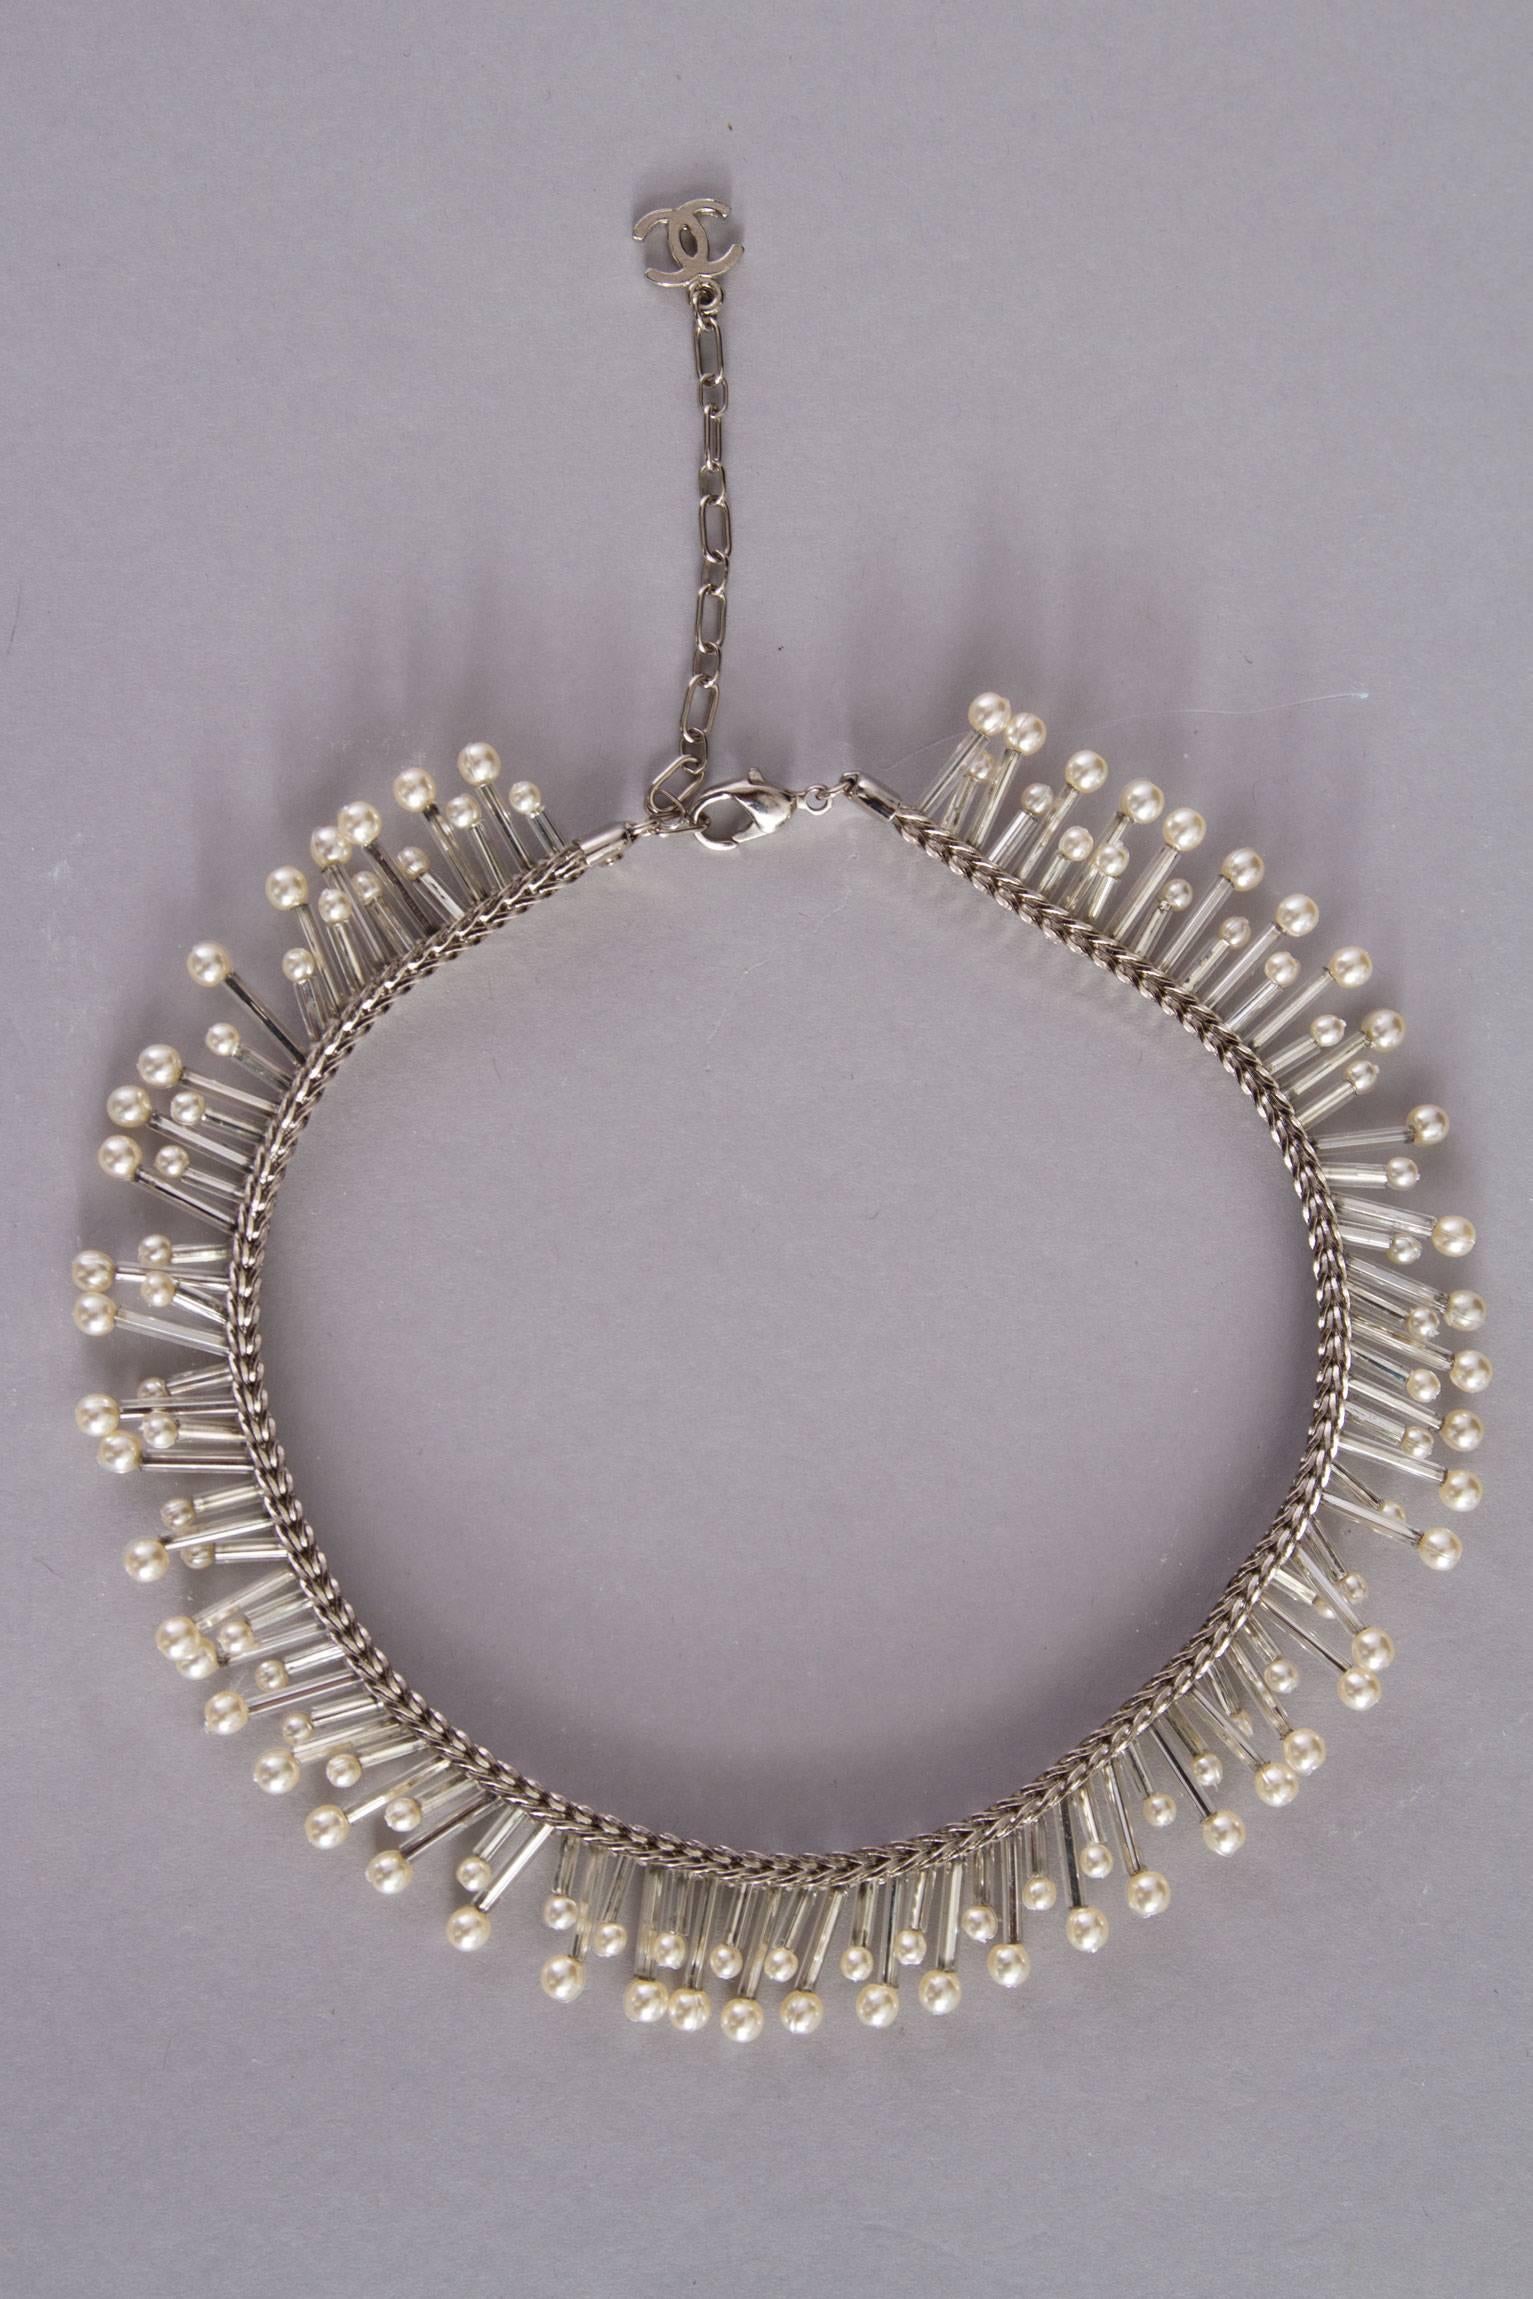 A gorgeous ca. 1990s silver Chanel beaded mother-of-pearl choker necklace. The necklace consists of a braided silver chain which is decorated with long cylinder shaped beads in varying lengths. At the end of each string a small pearl is attached. At